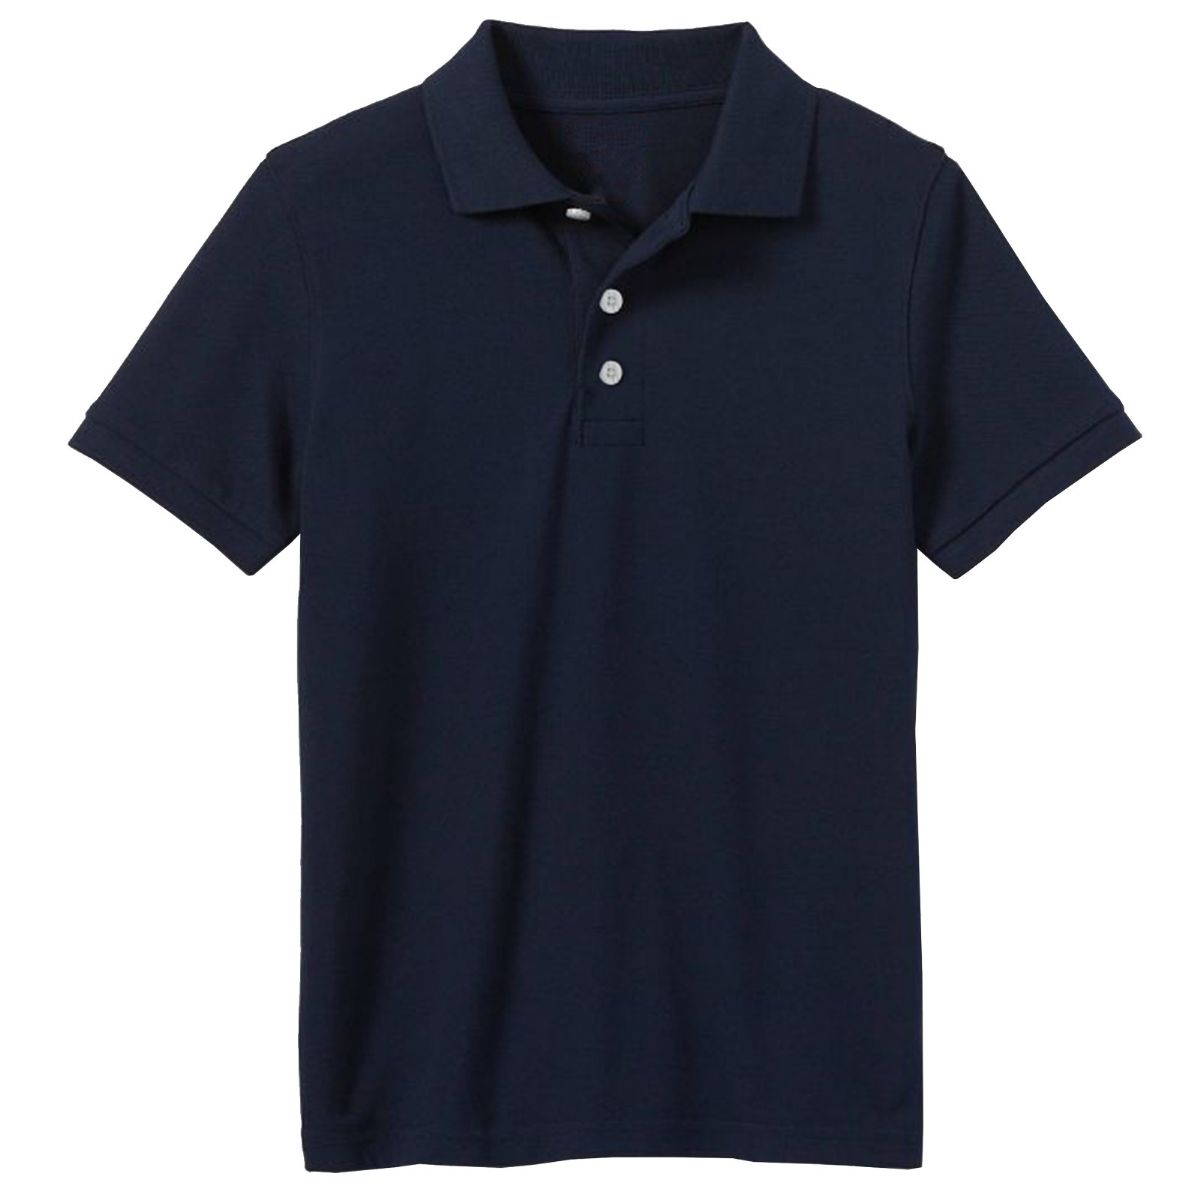 24 Pieces of Youth Polo Shirt Navy In Size S